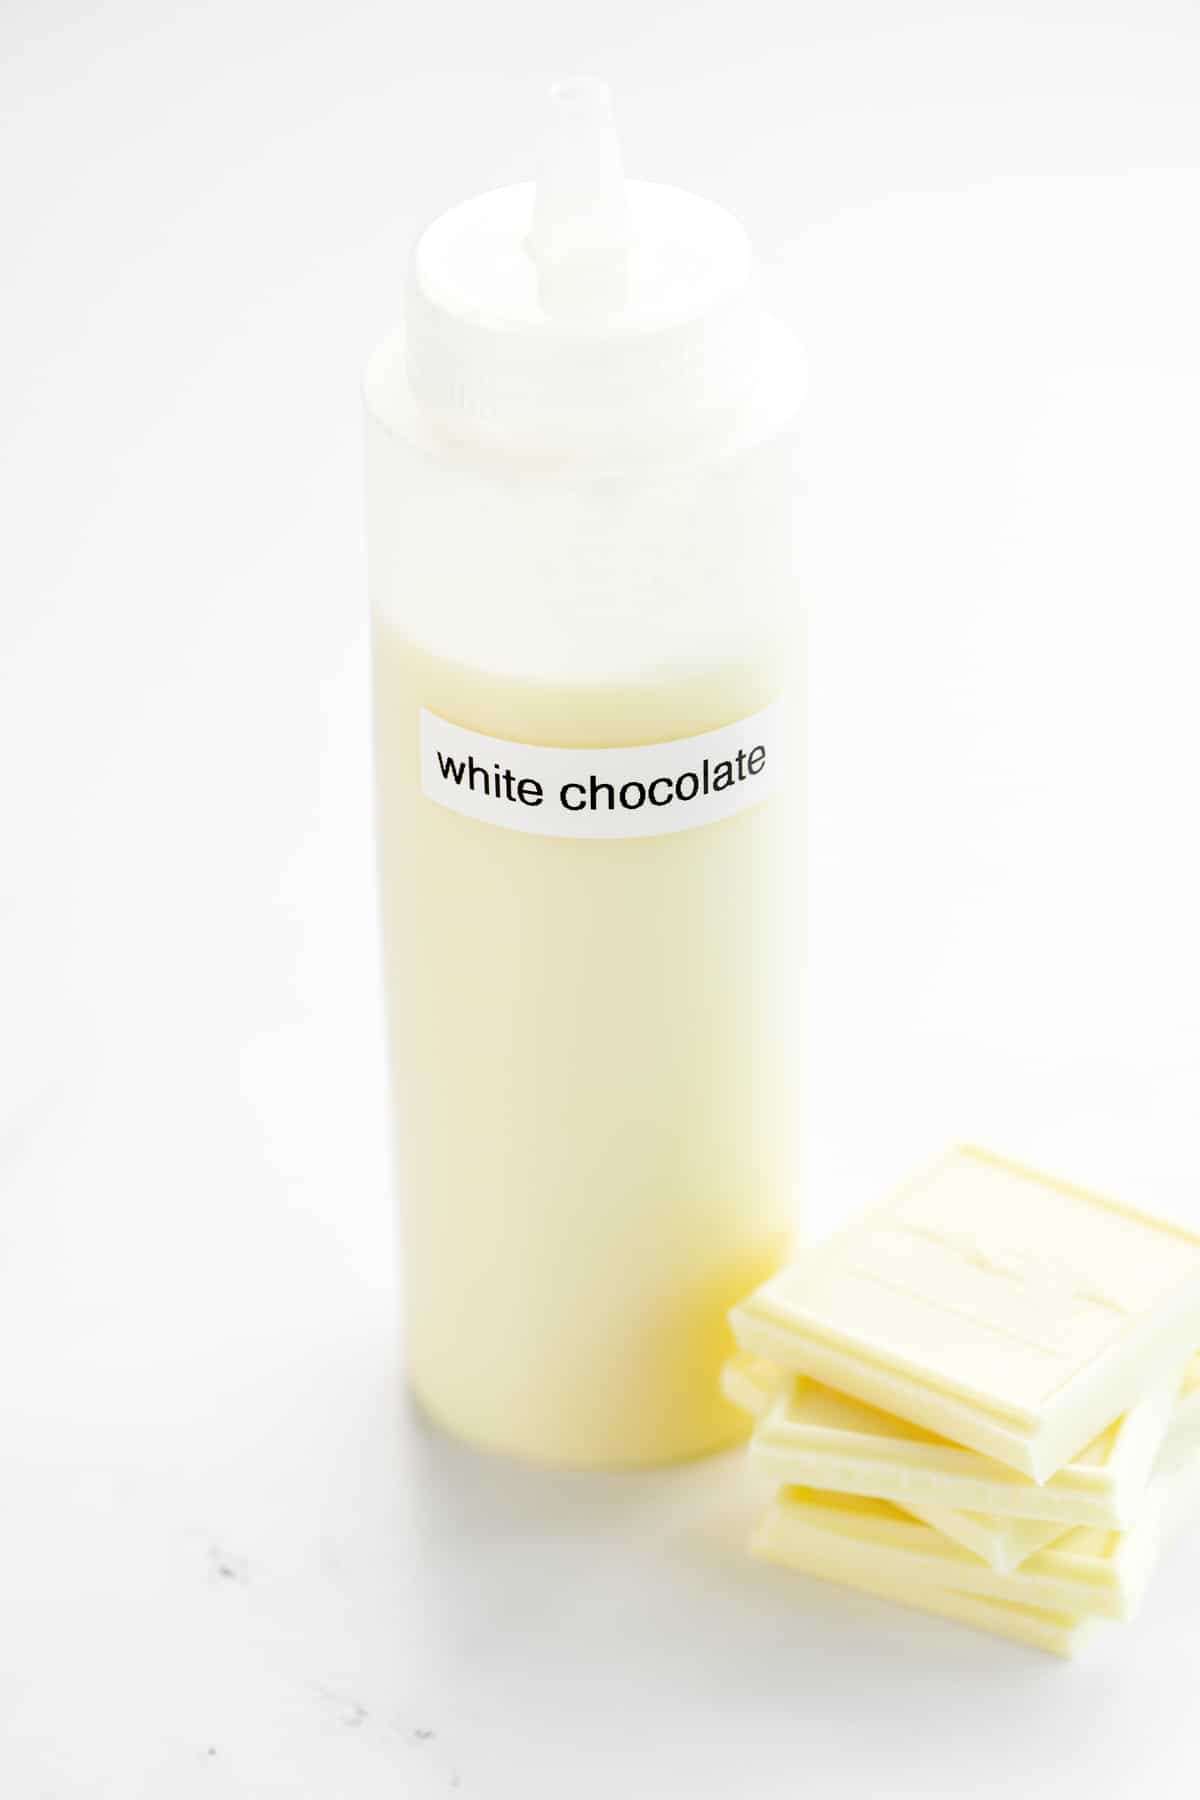 White chocolate sauce in a bottle.